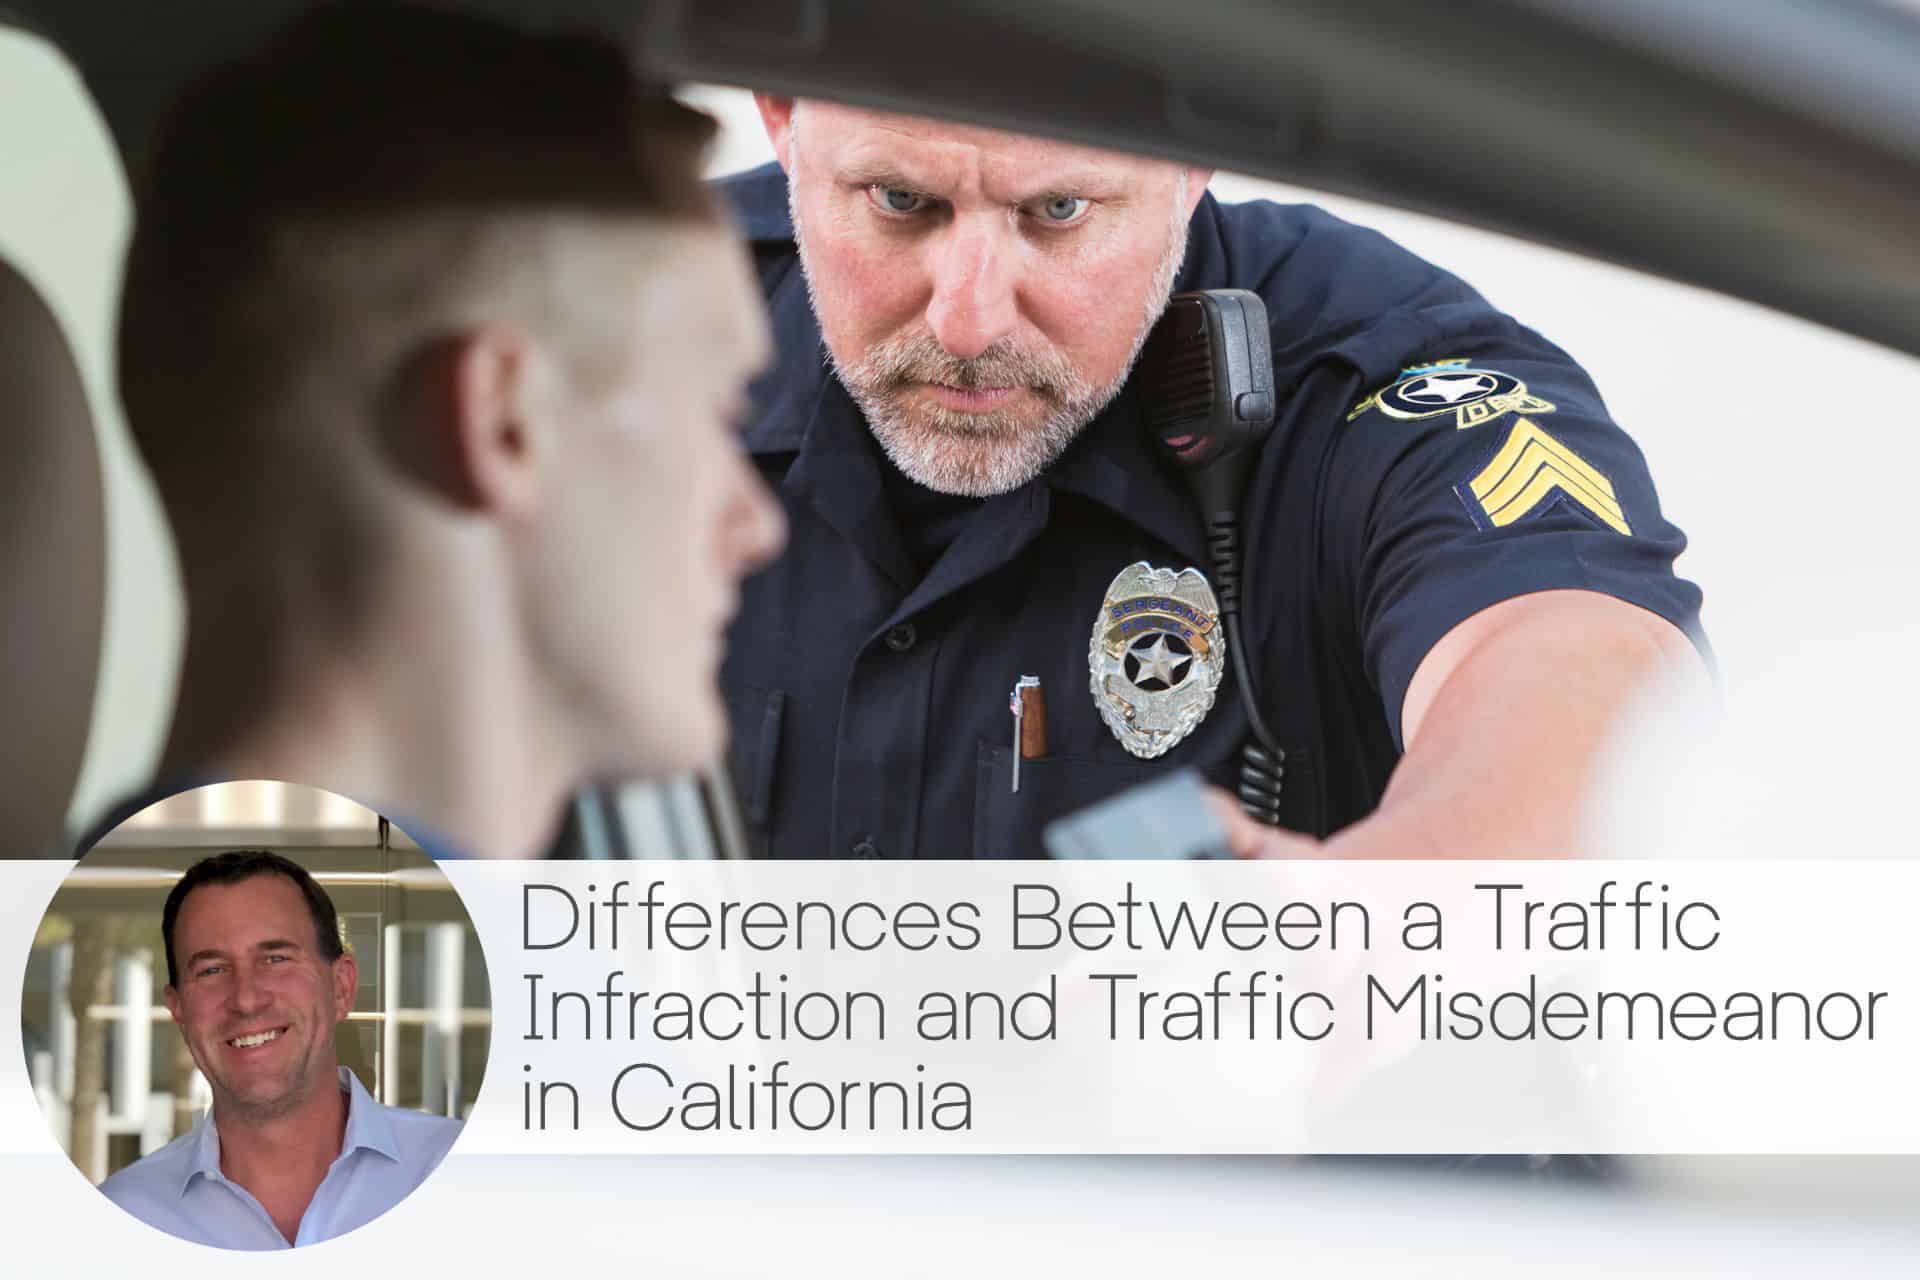 Differences between a traffic infraction and traffic misdemeanor